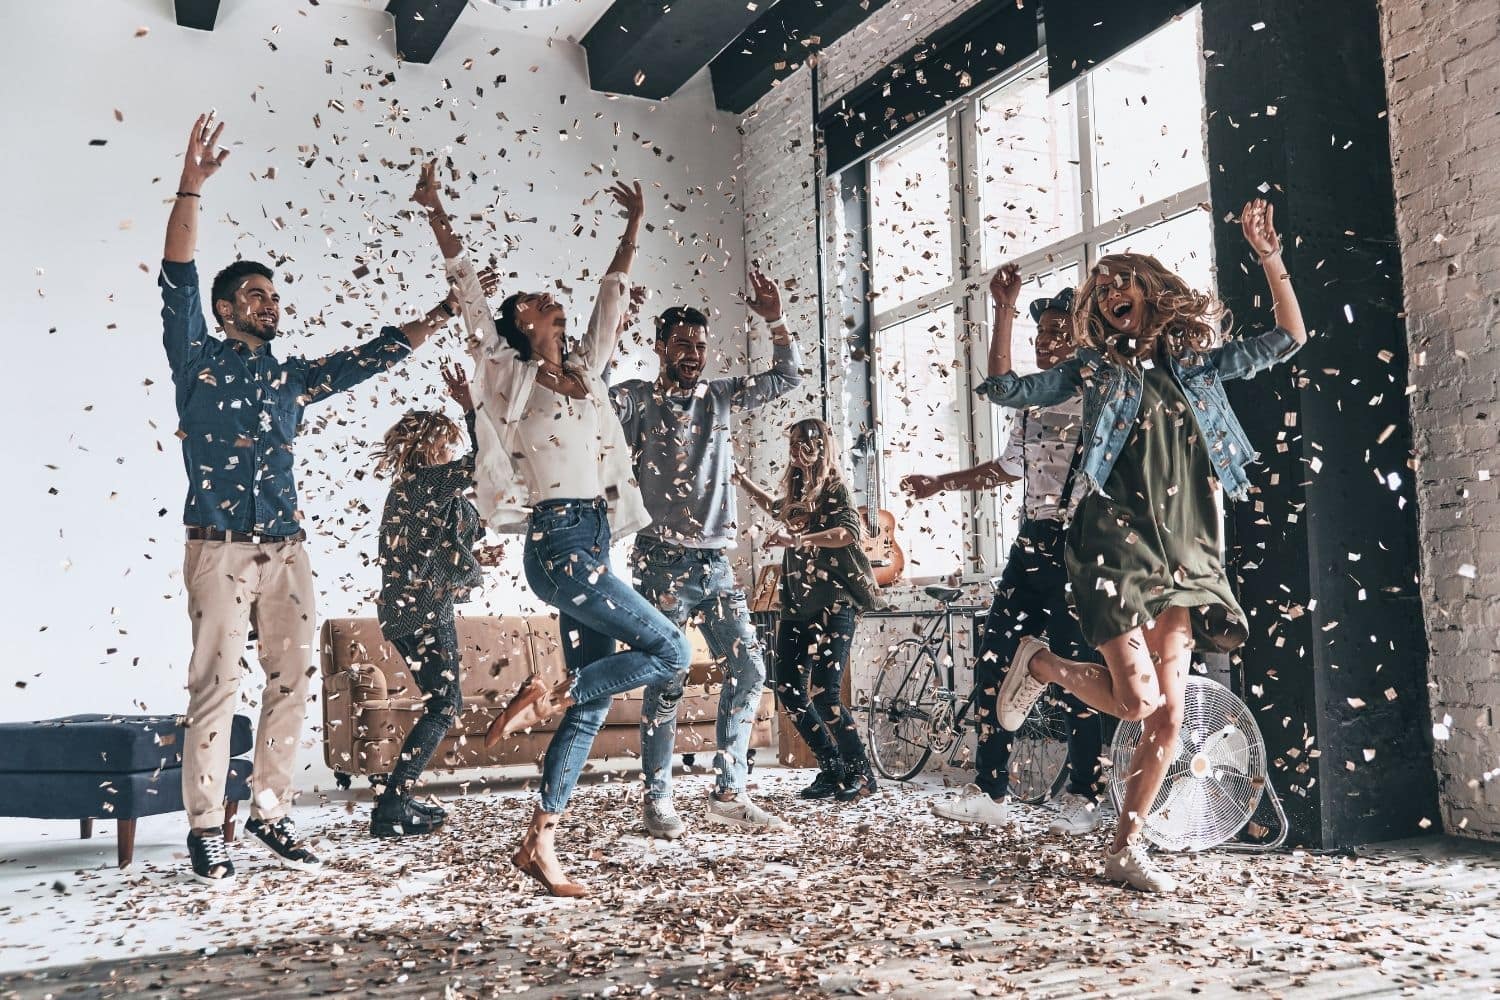 Coworkers celebrate with confetti in the office